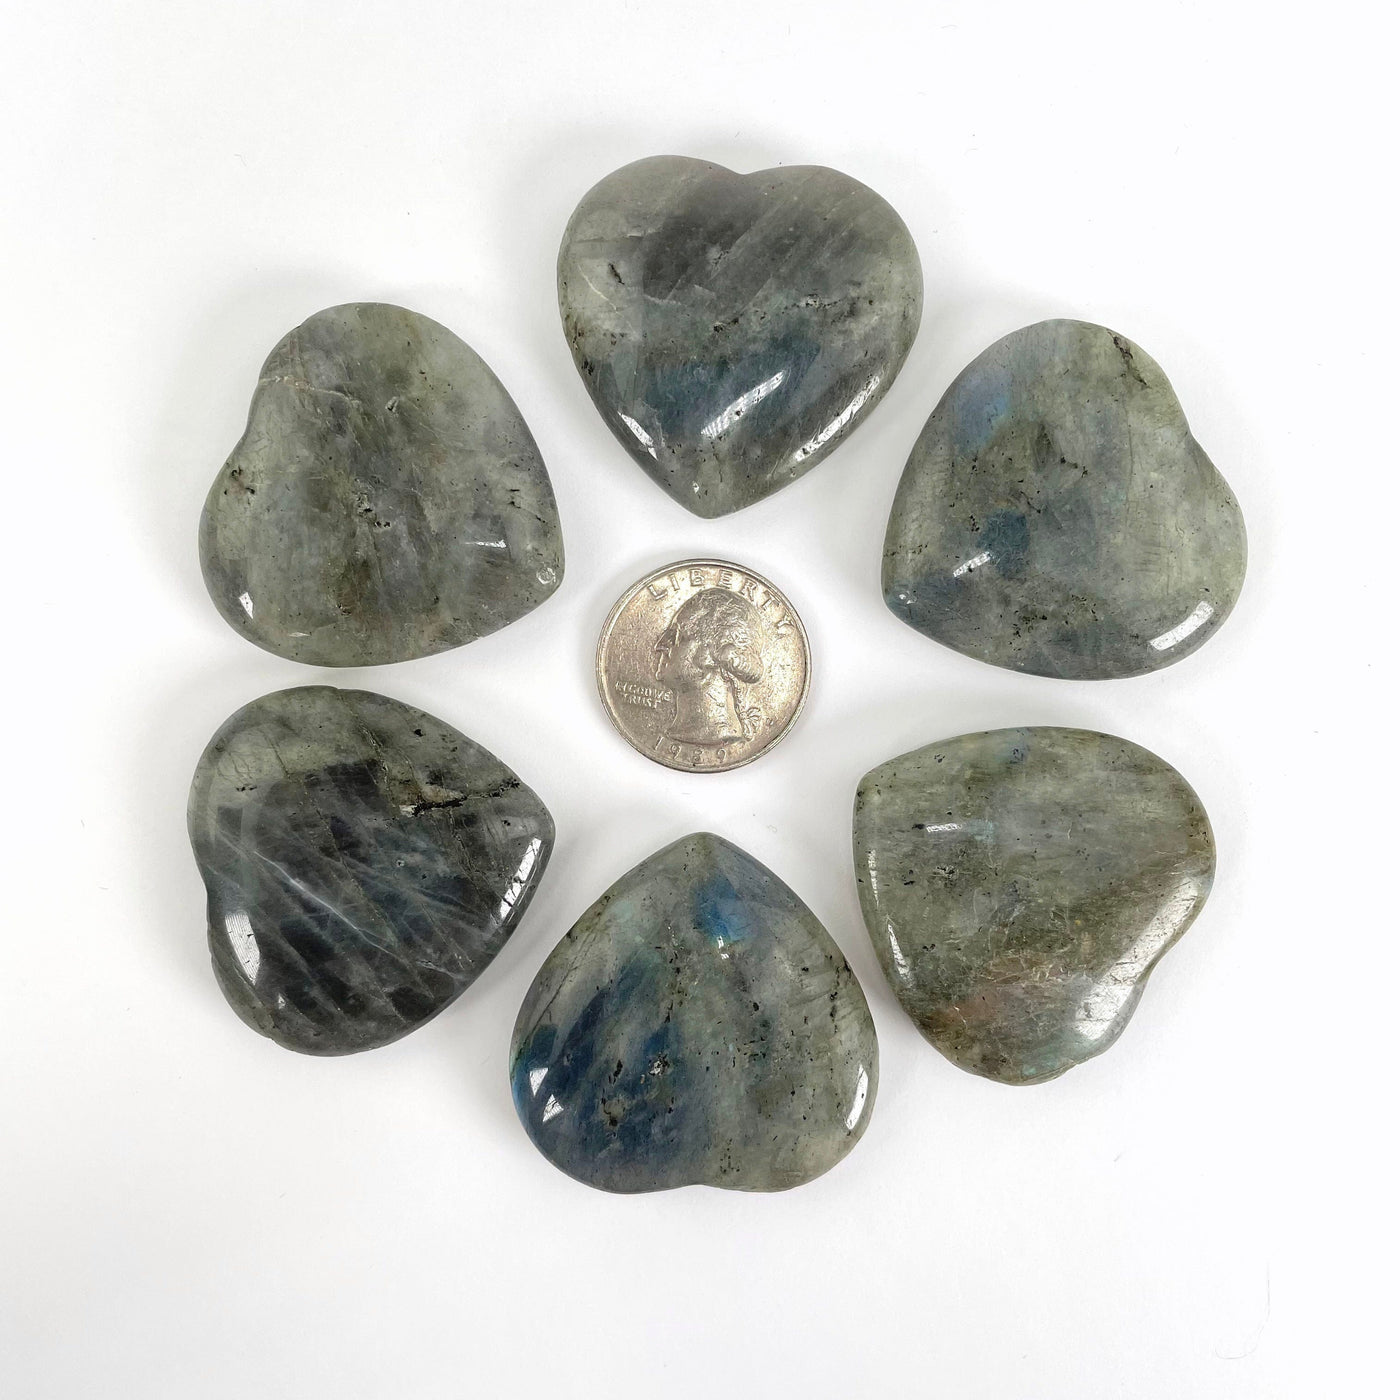 labradorite polished hearts with quarter for size reference